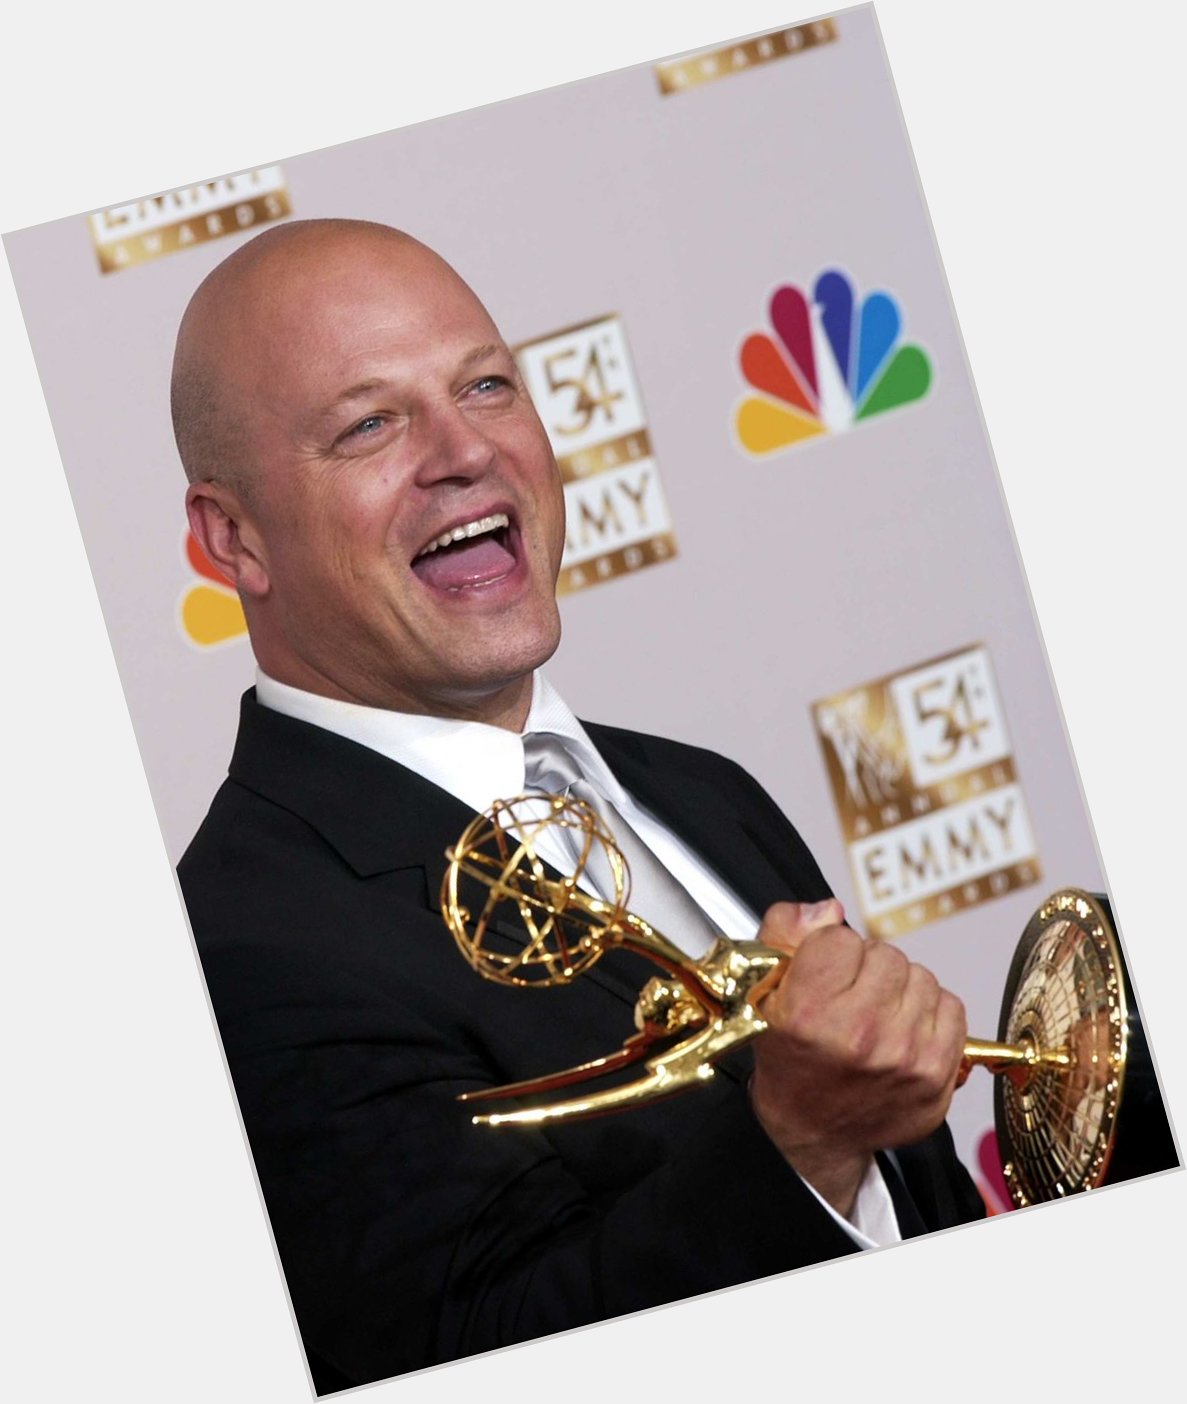 Happy Birthday to Michael Chiklis, who turns 52 today! 